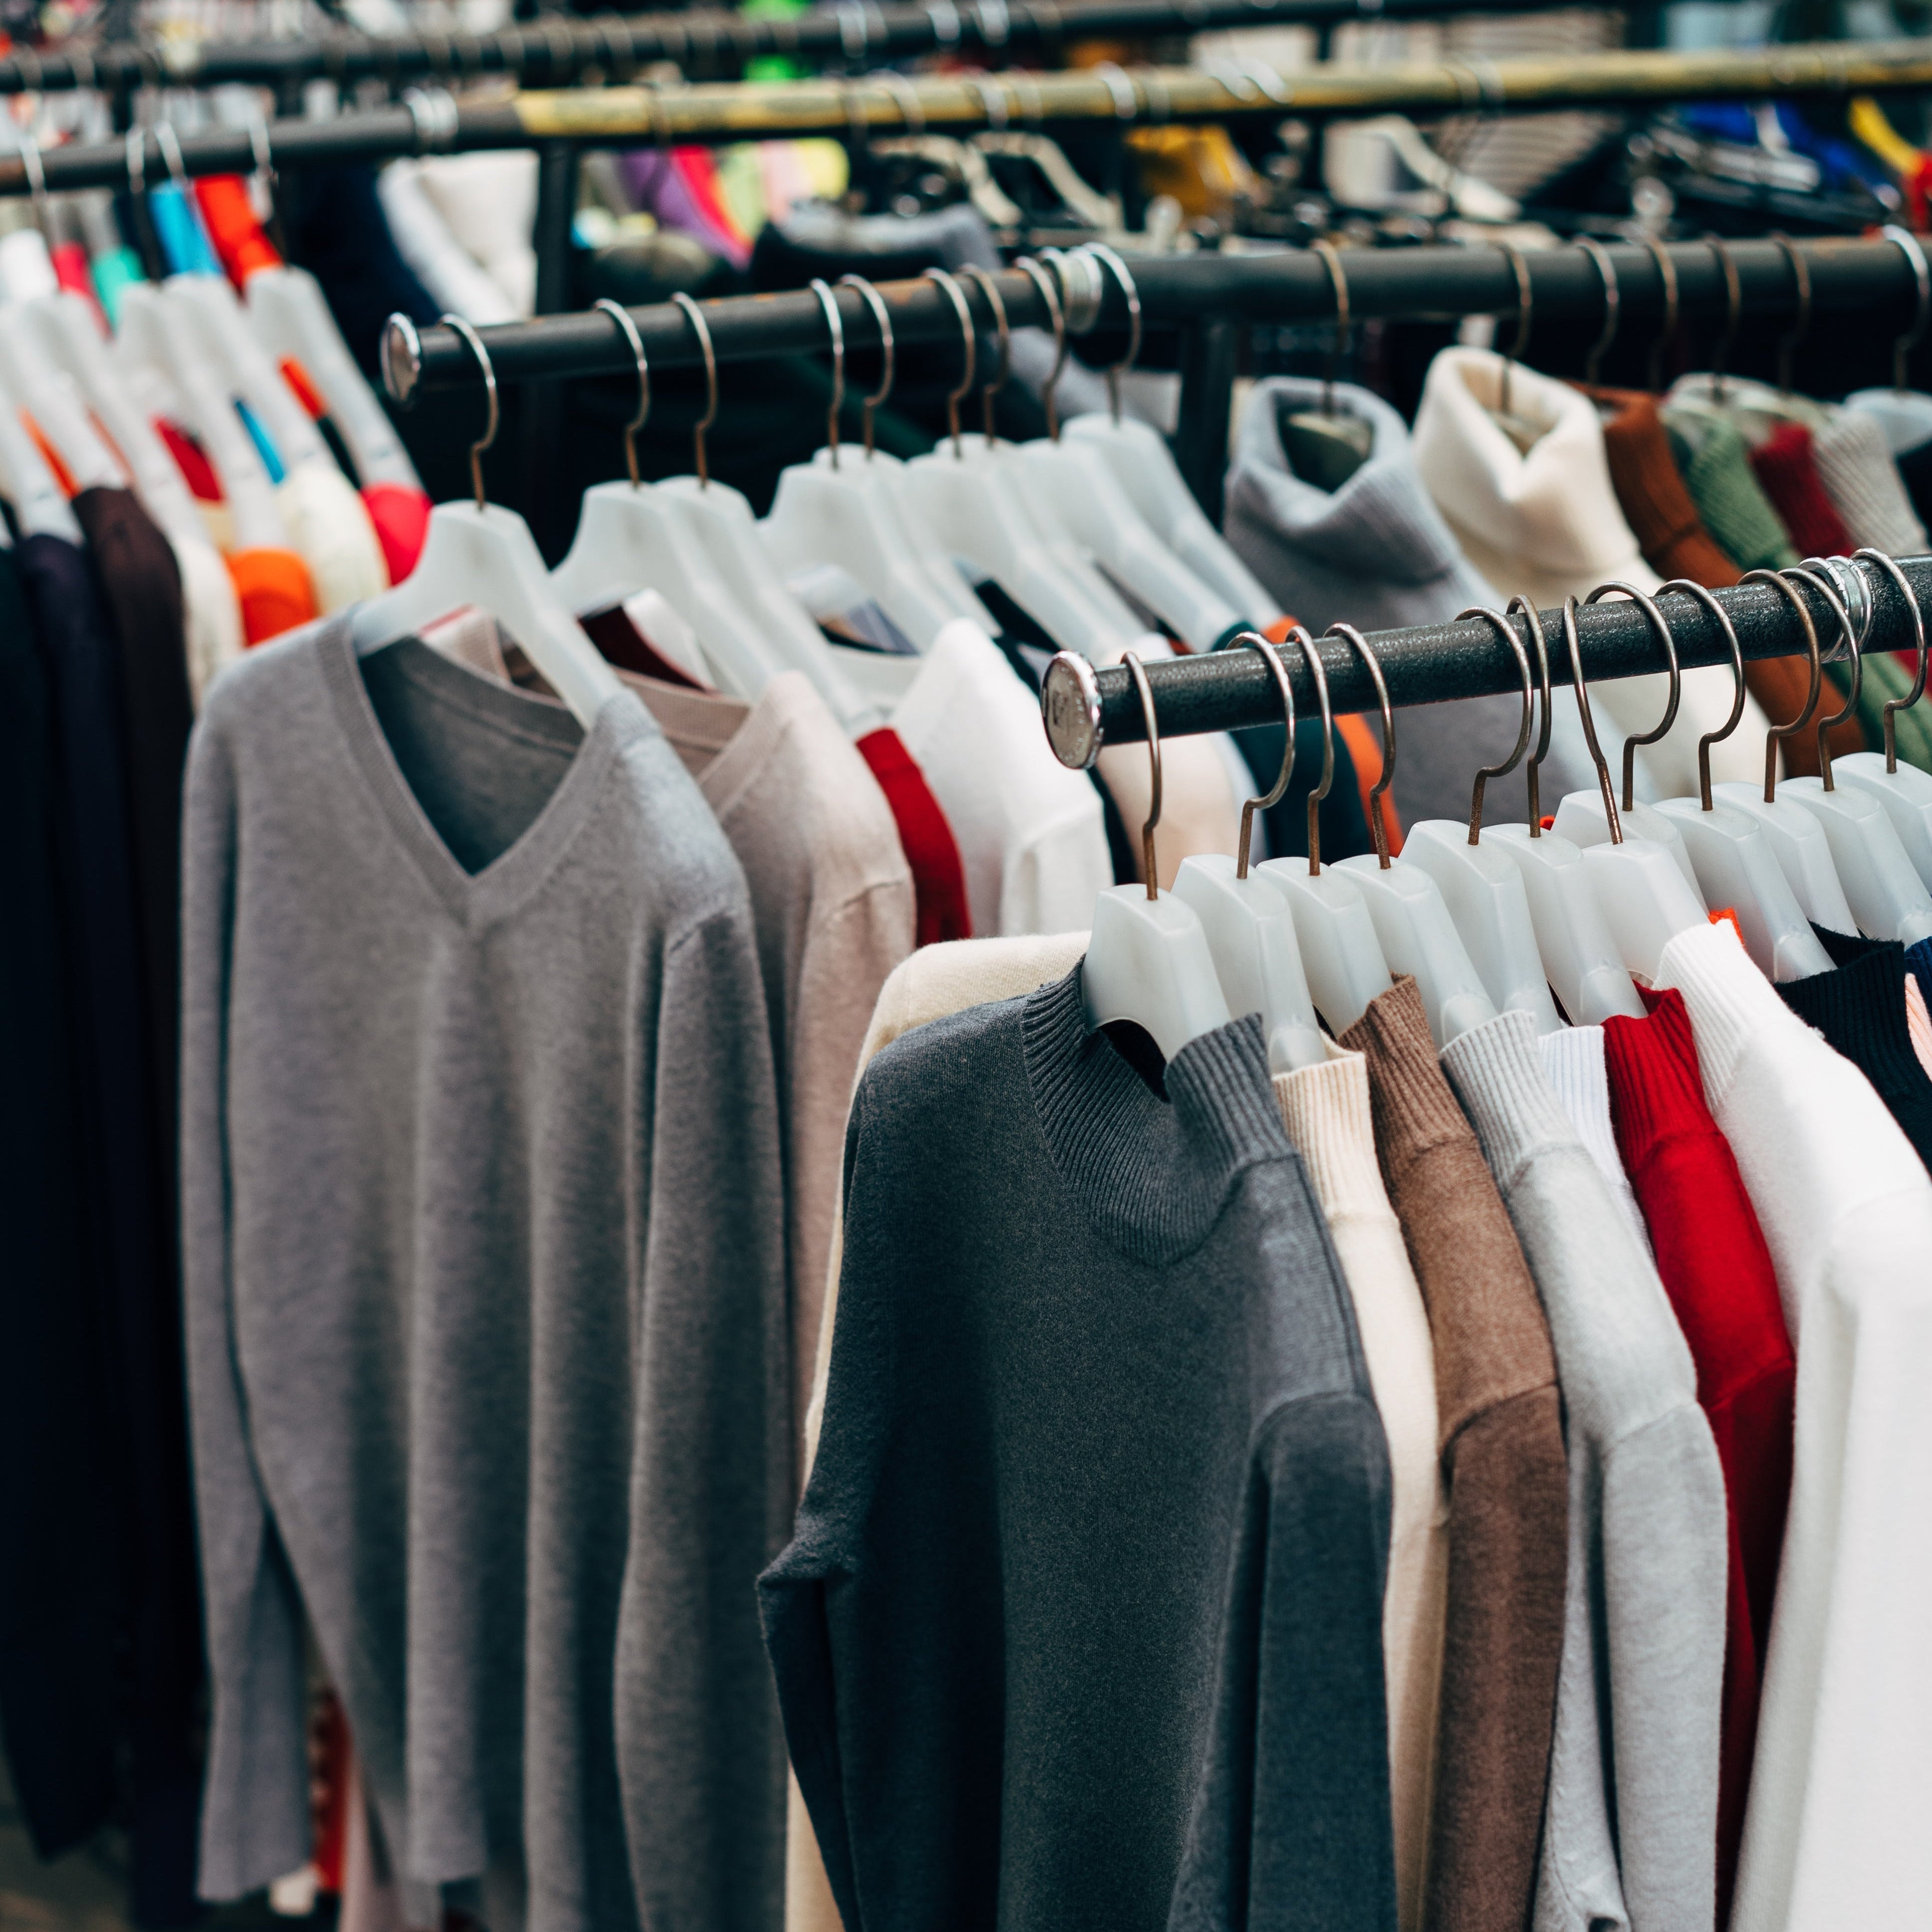 What’s Stopping Fast Fashion from Paying a Living Wage? - FRANC